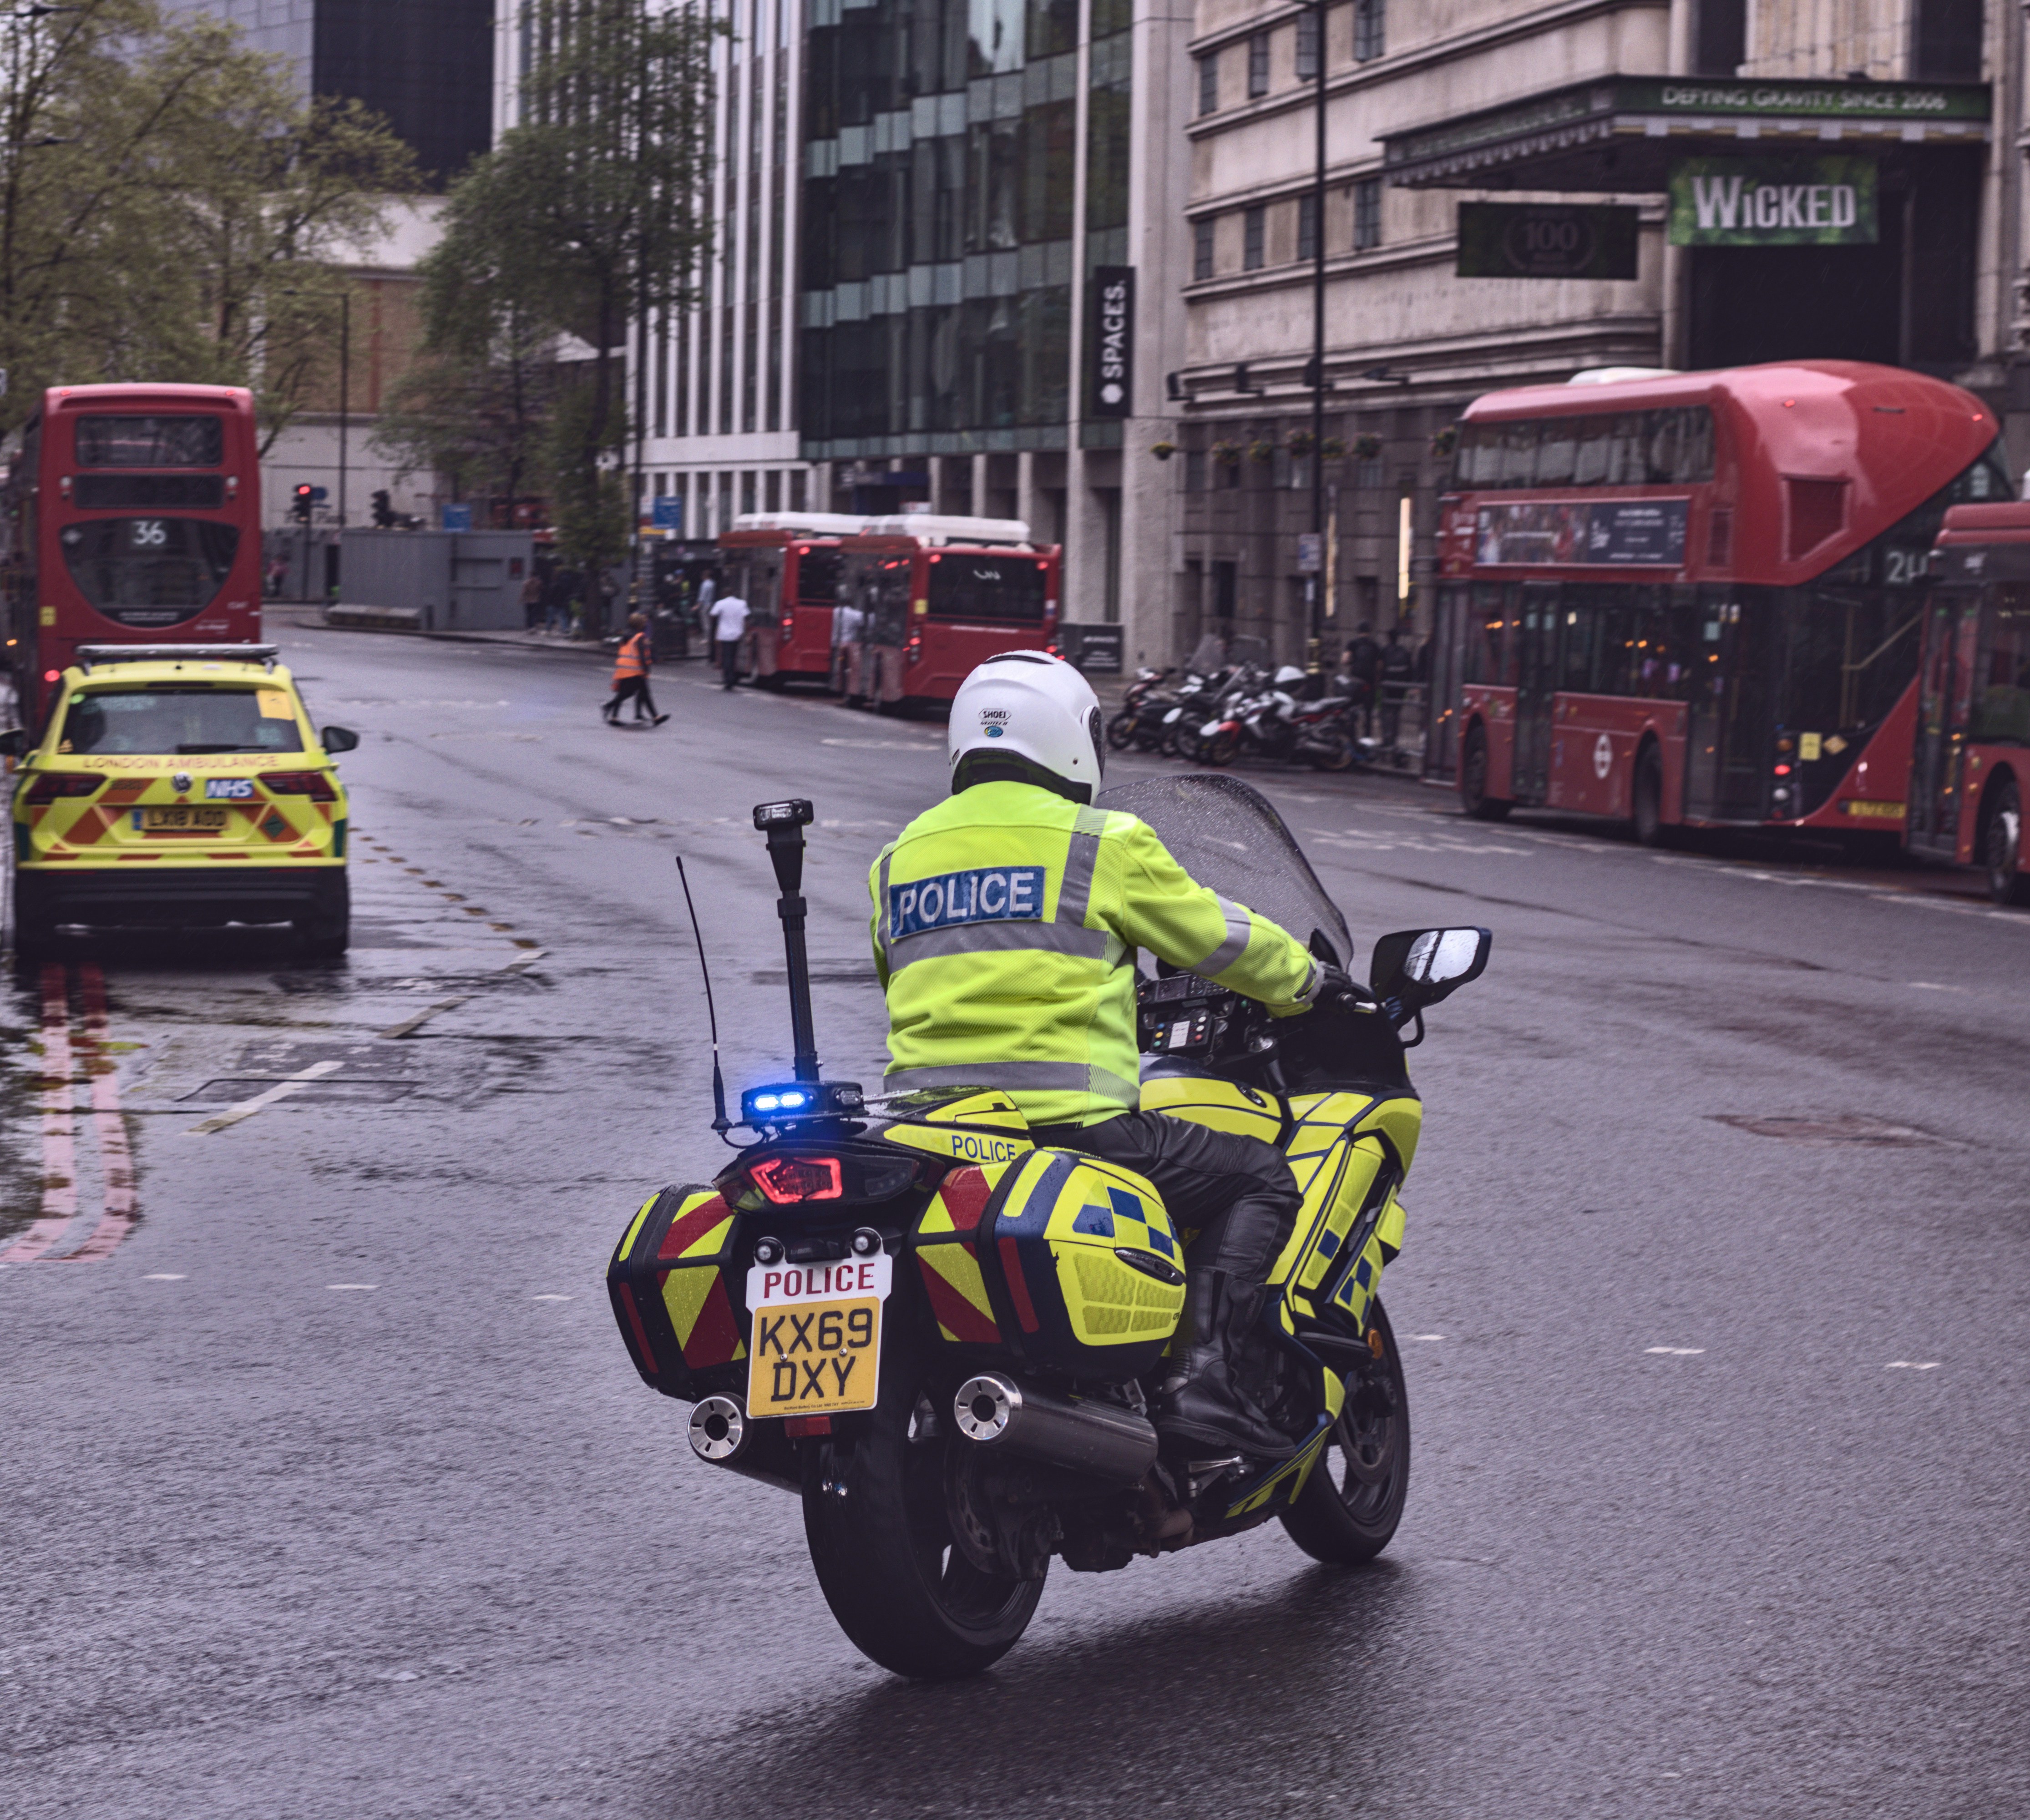 Police Special Escort Group (SEG) officer on Kings Coronation escorting vehicles in London.